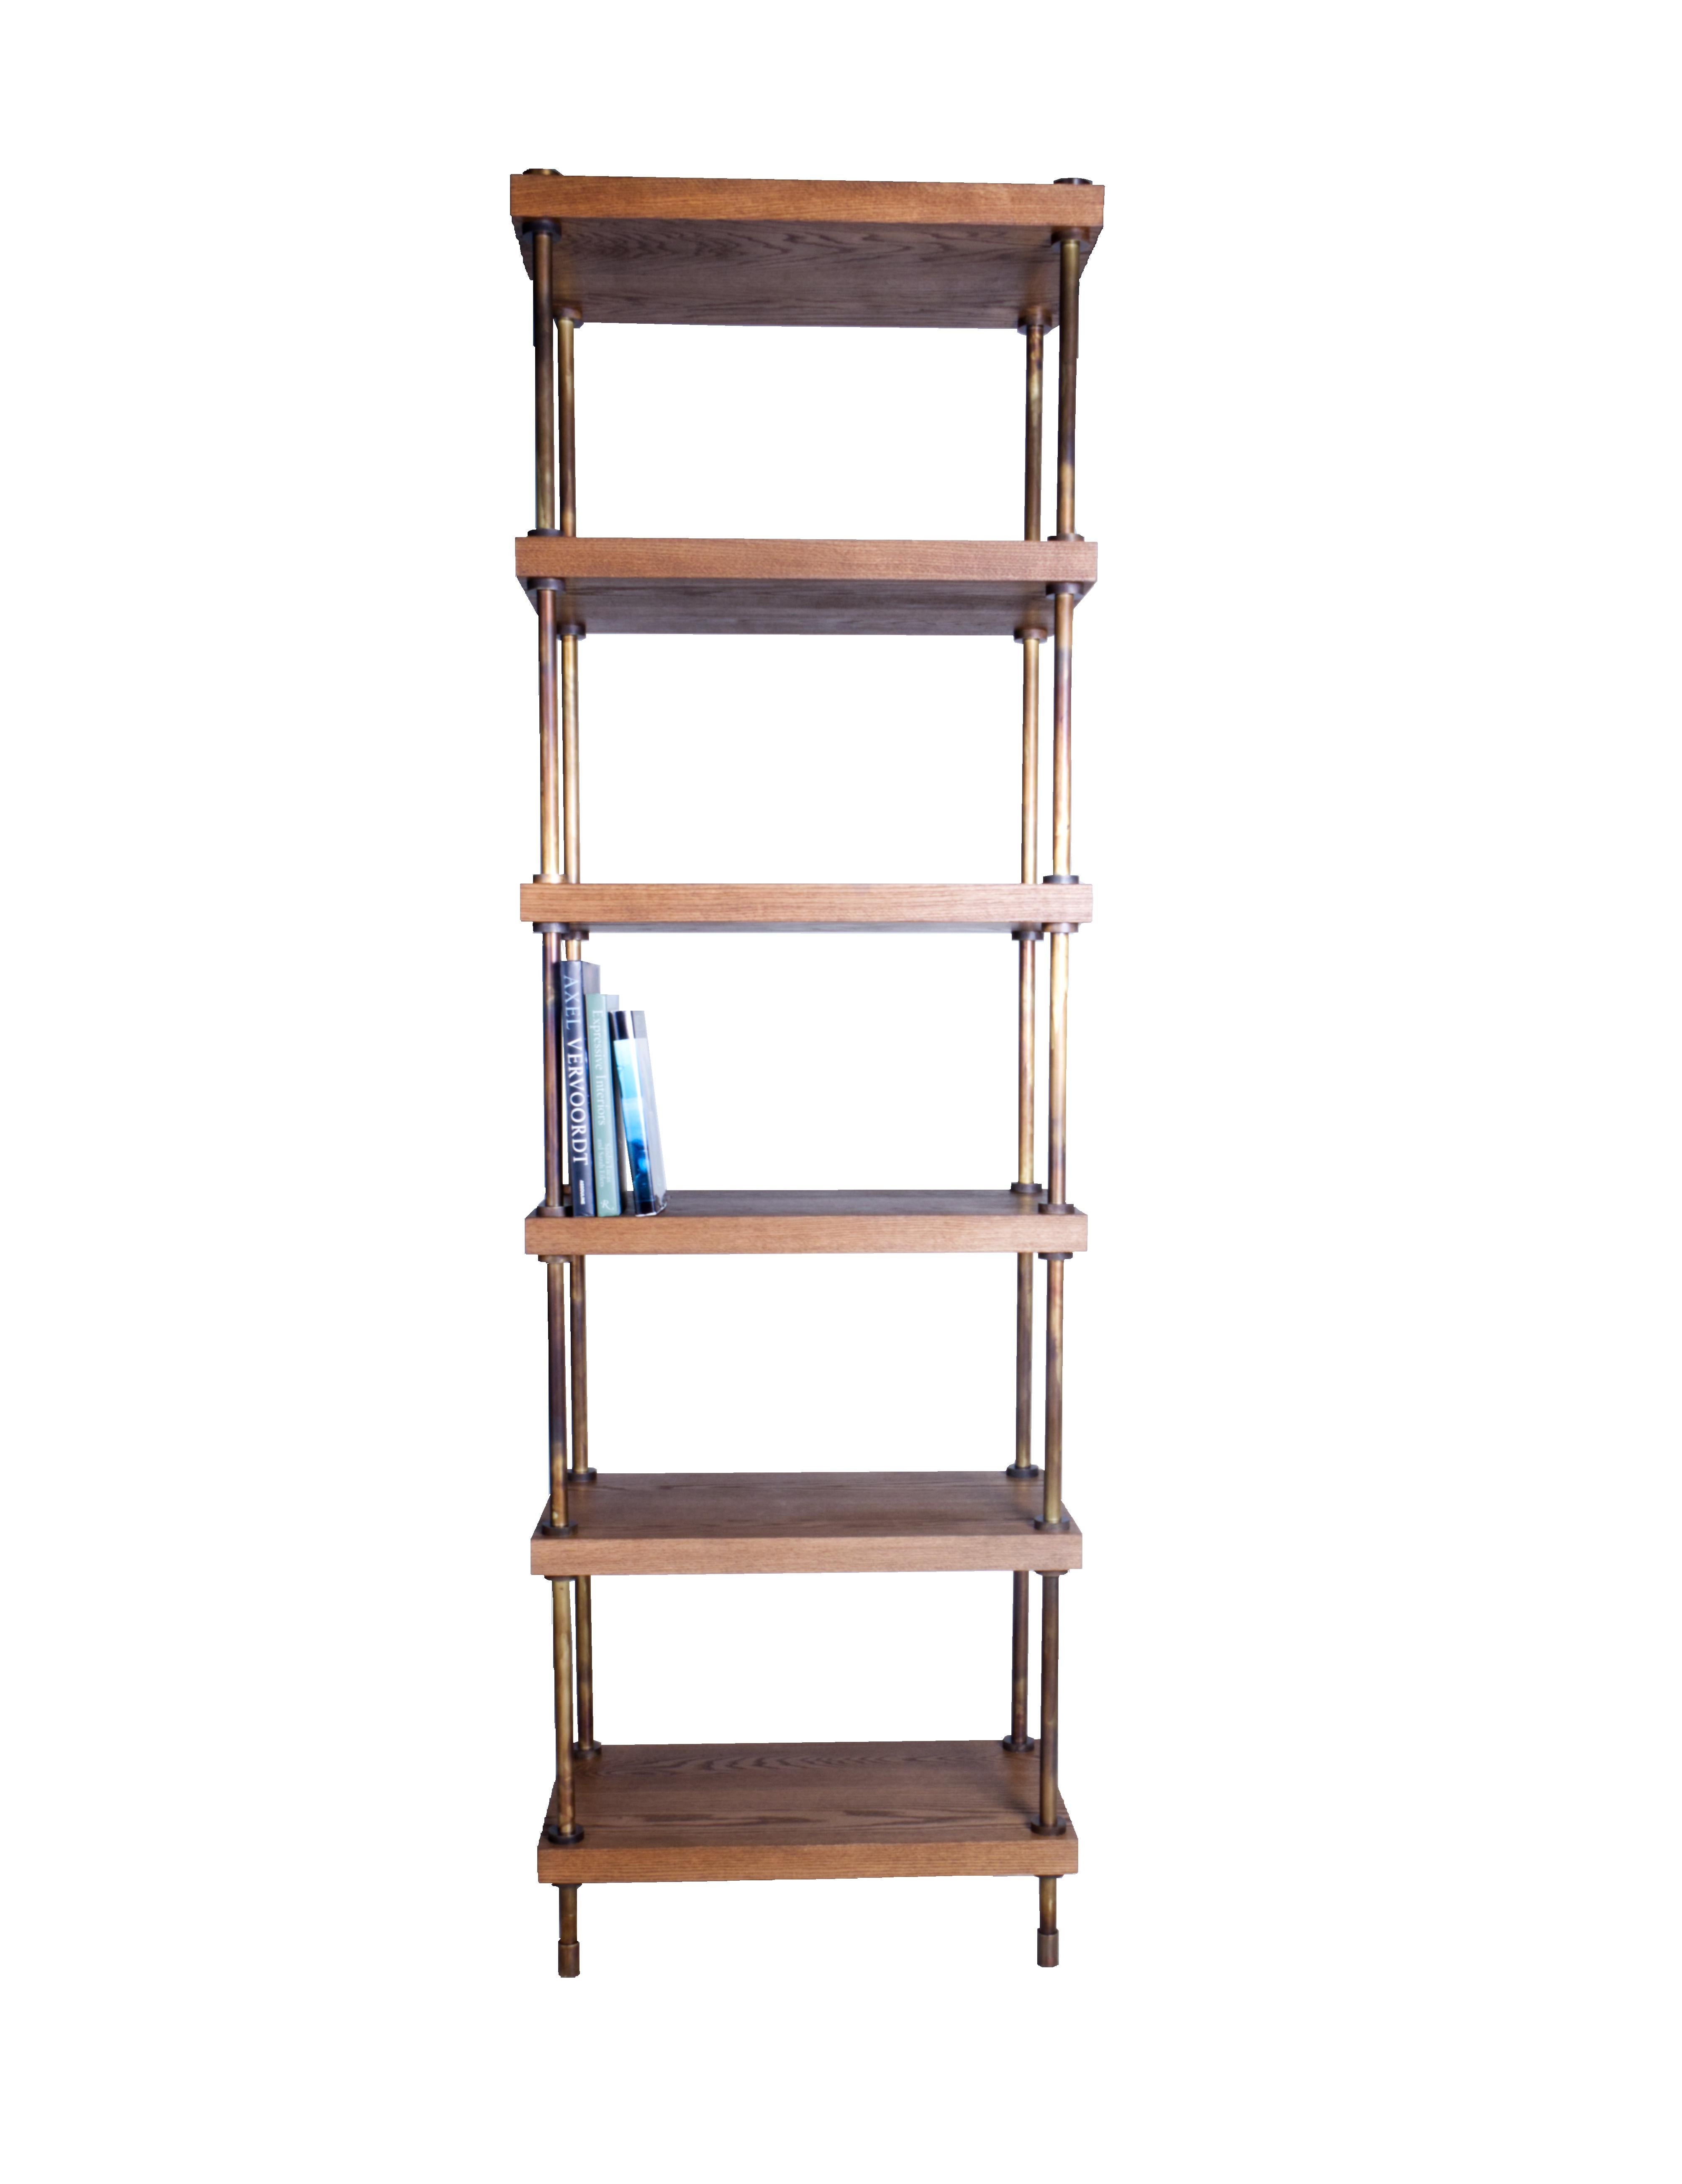 Custom industrial walnut bookshelf with brass elements.Designed by Brendan Bass for the Vision and Design Collection, by using high quality materials and textures. All materials are sourced from local vendors throughout the state of Texas. The